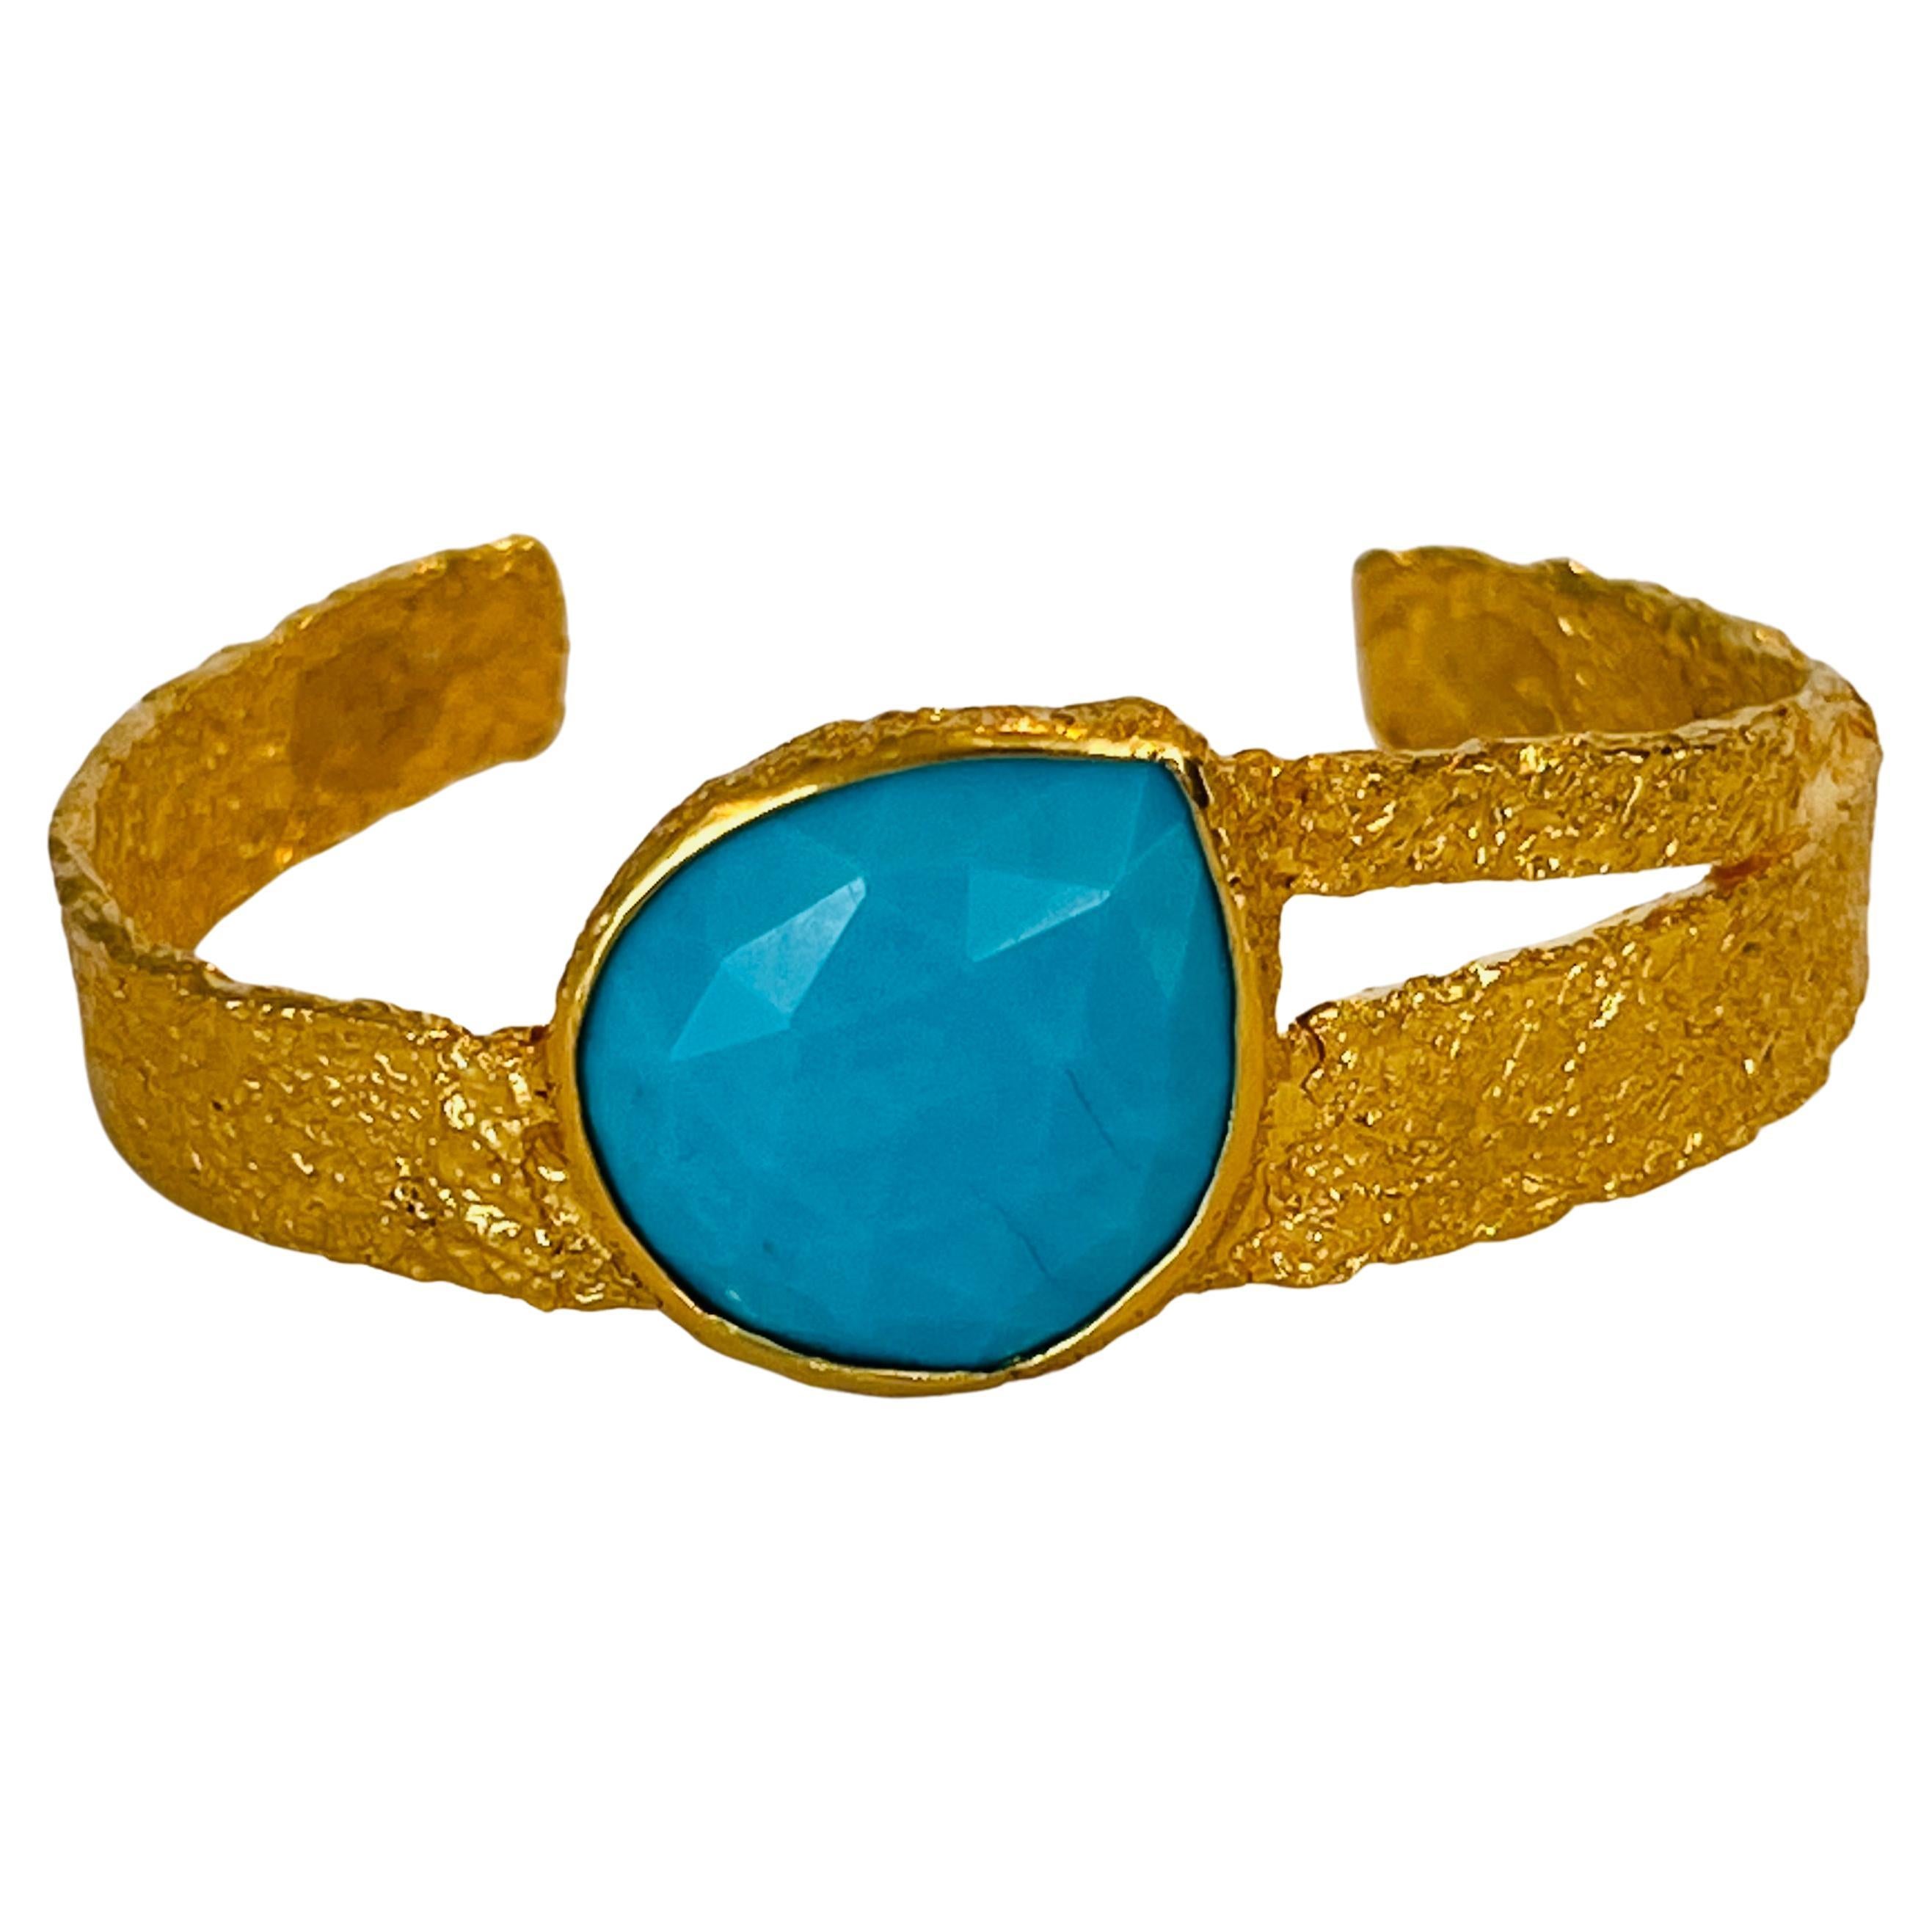 22k Gold Handmade Cuff with Turquoise, by Tagili